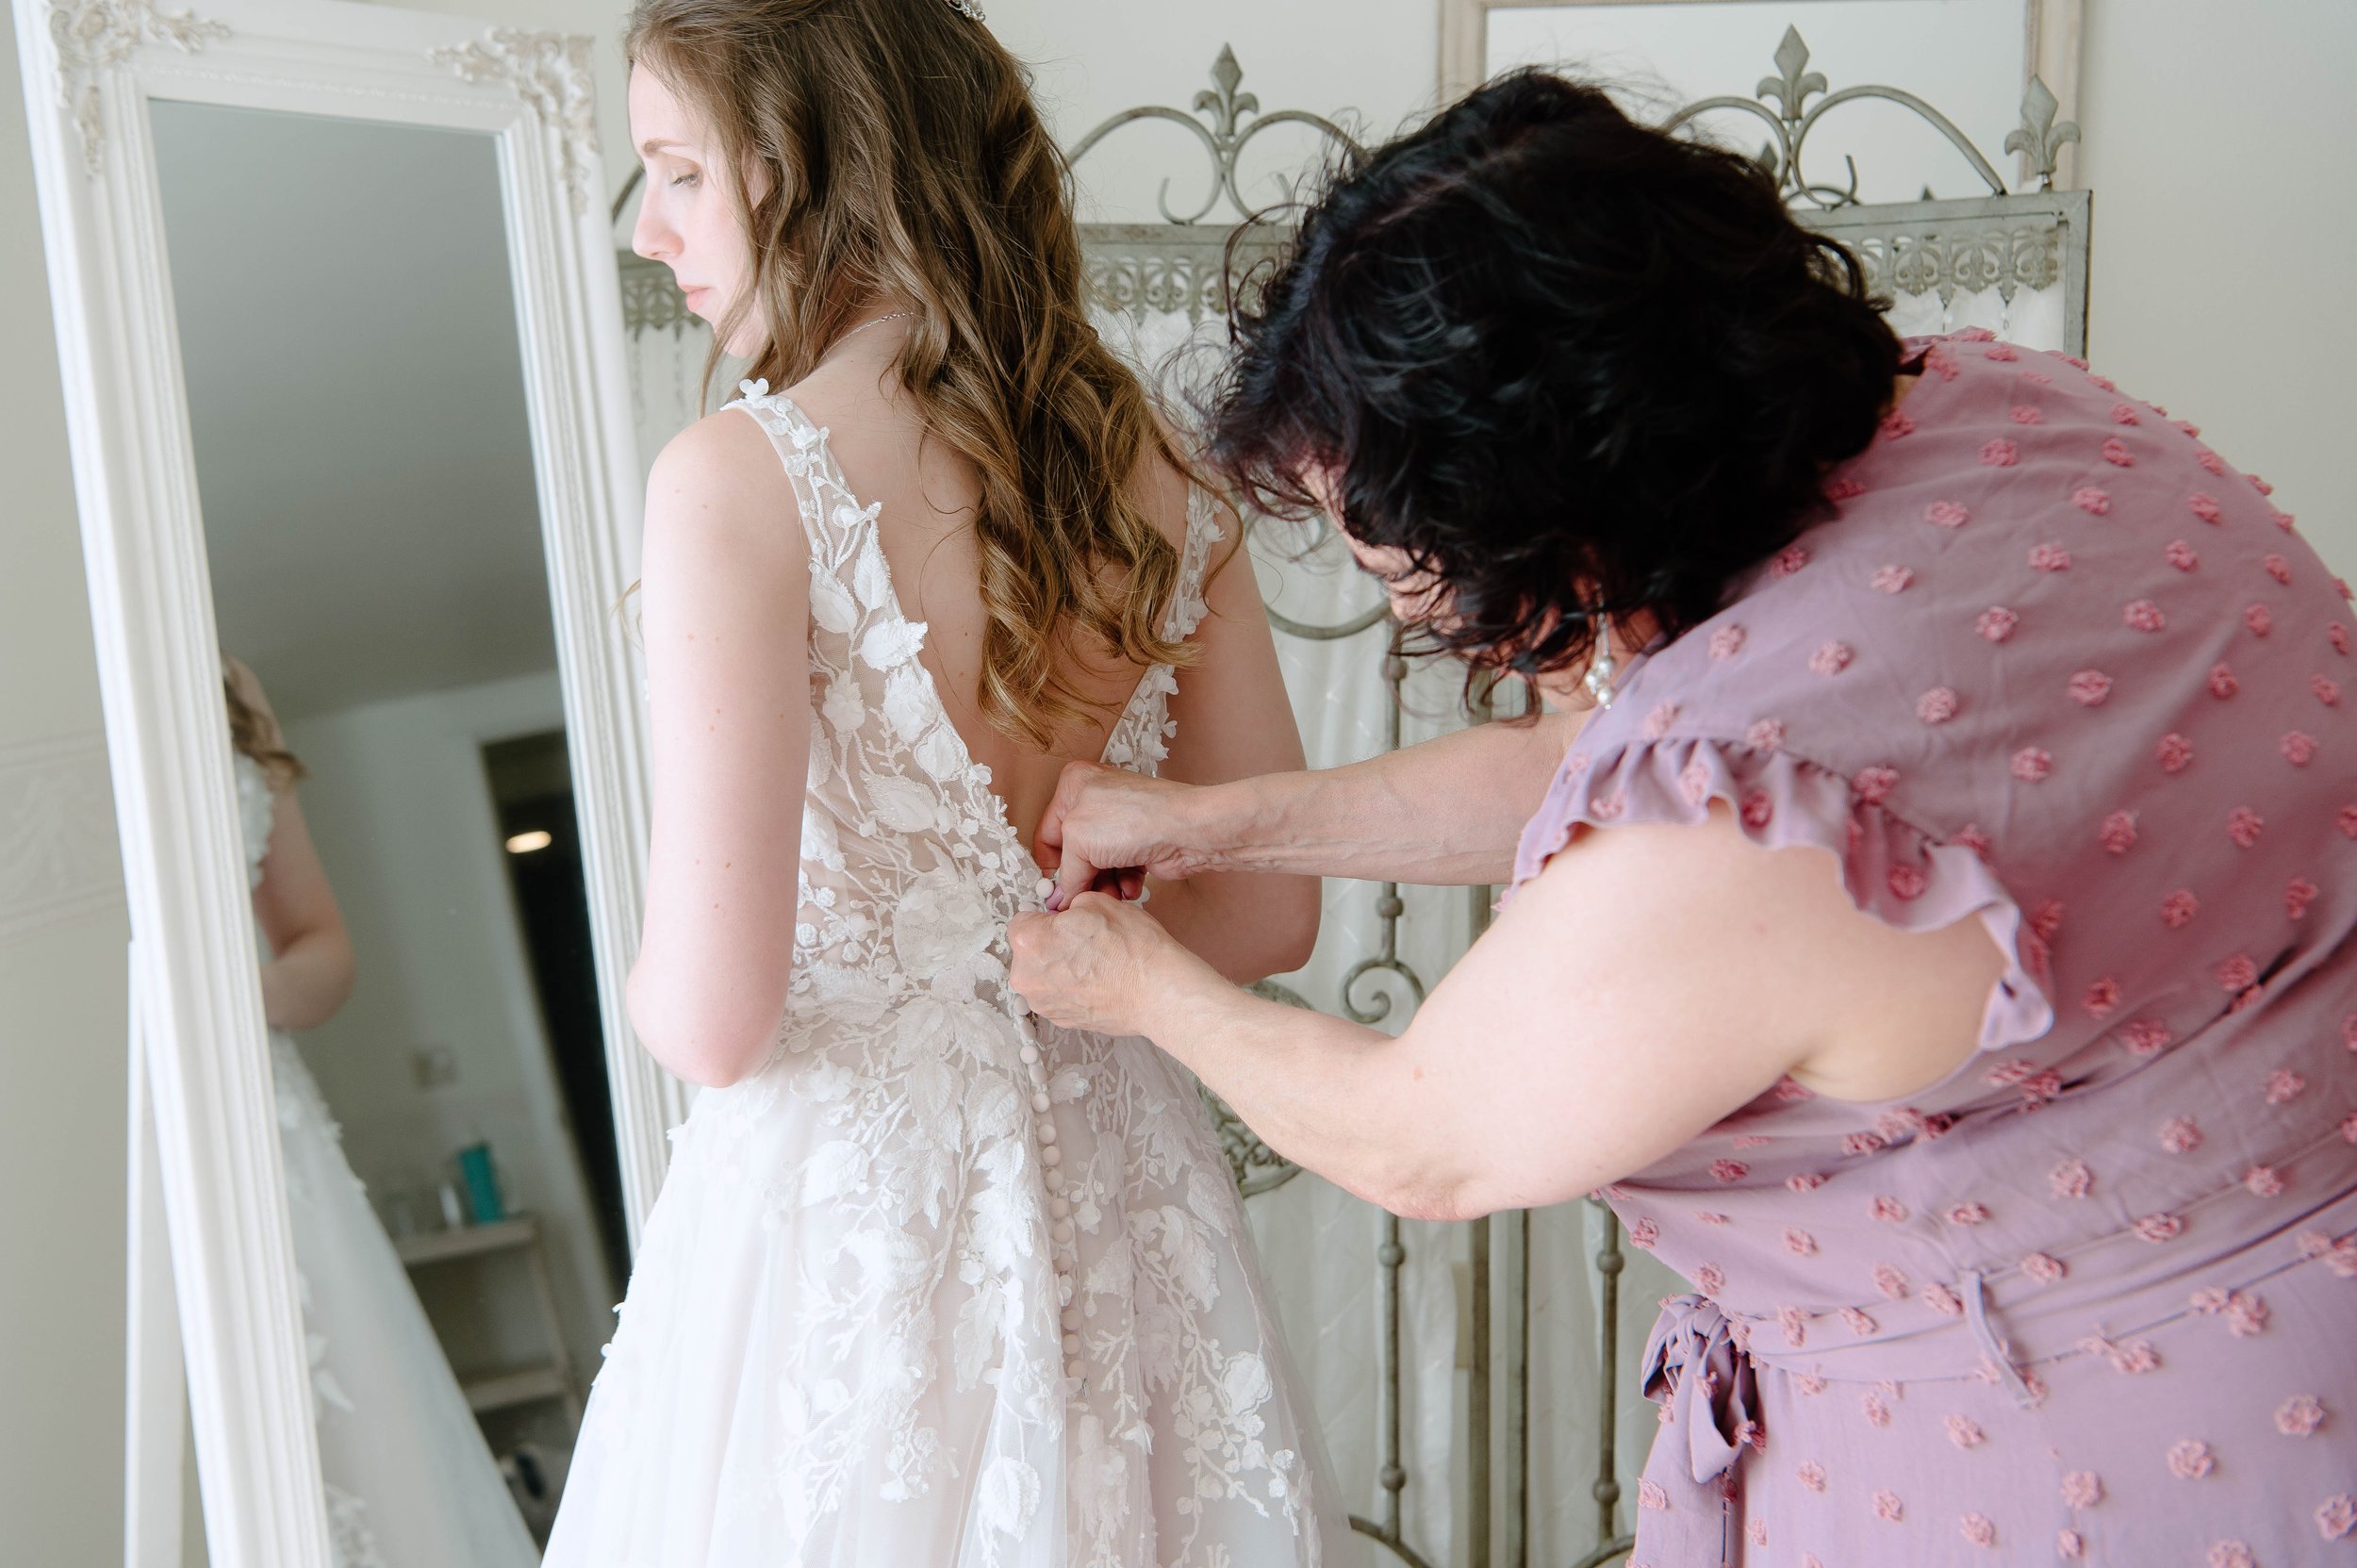  Mother of the Bride helping the Bride into her Wedding Dress 